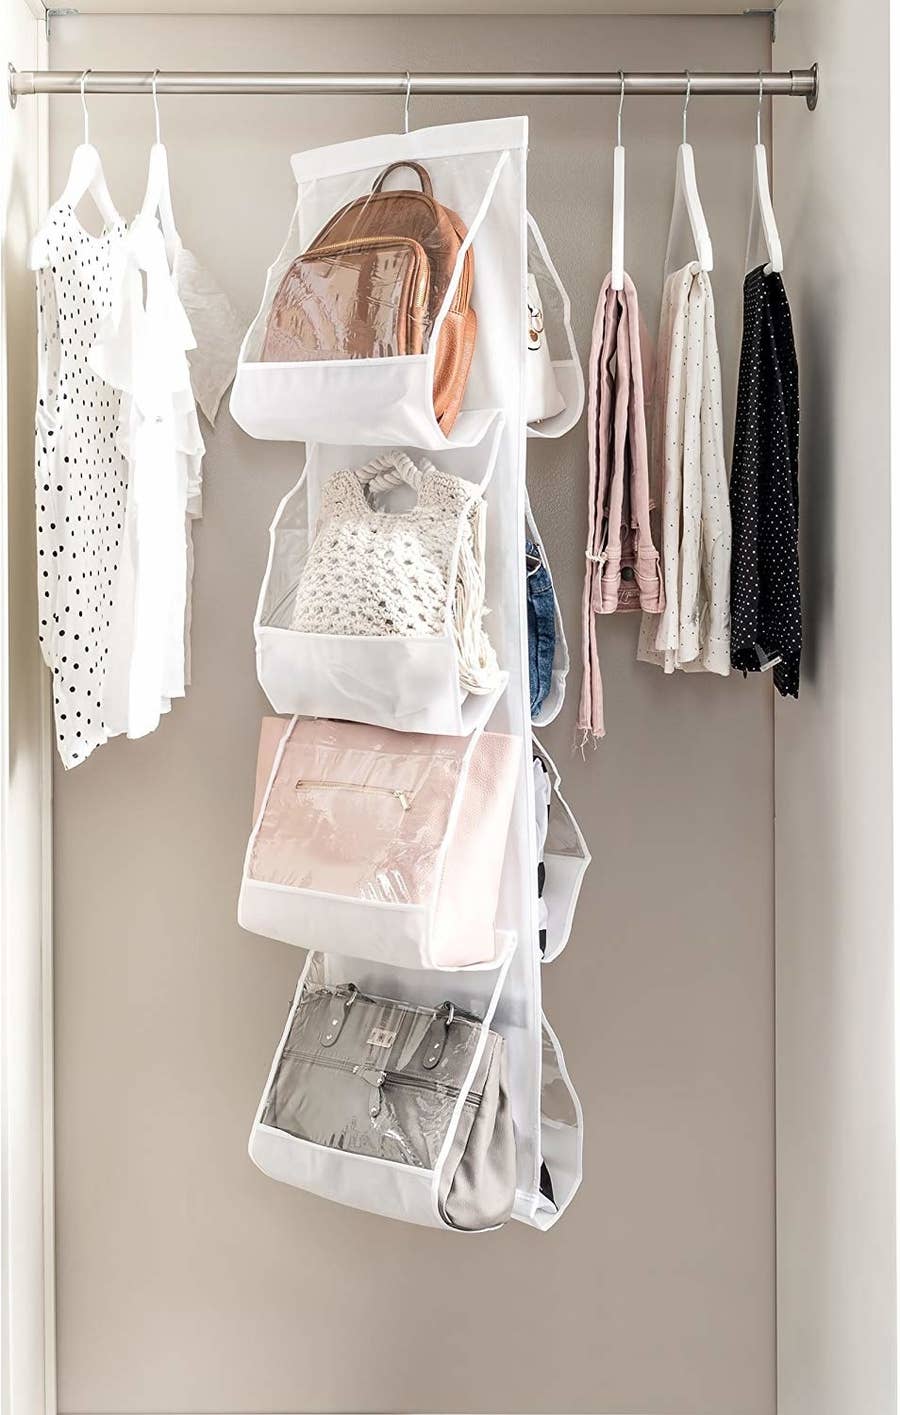 Hotels get rid of closets, add other storage solutions